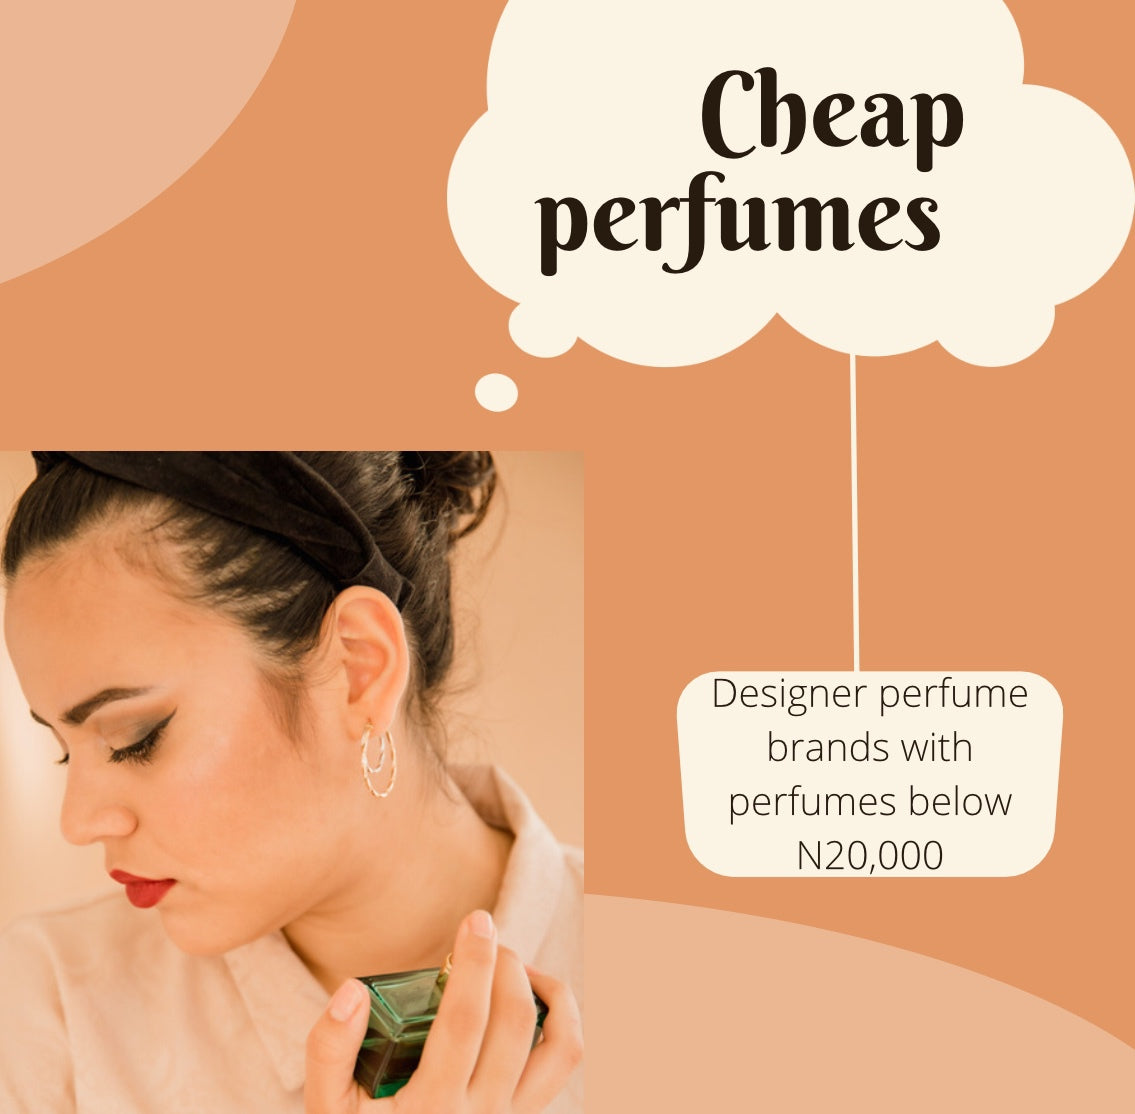 You’ll be shocked to know these designer perfume brands have perfumes below 20,000 Naira.